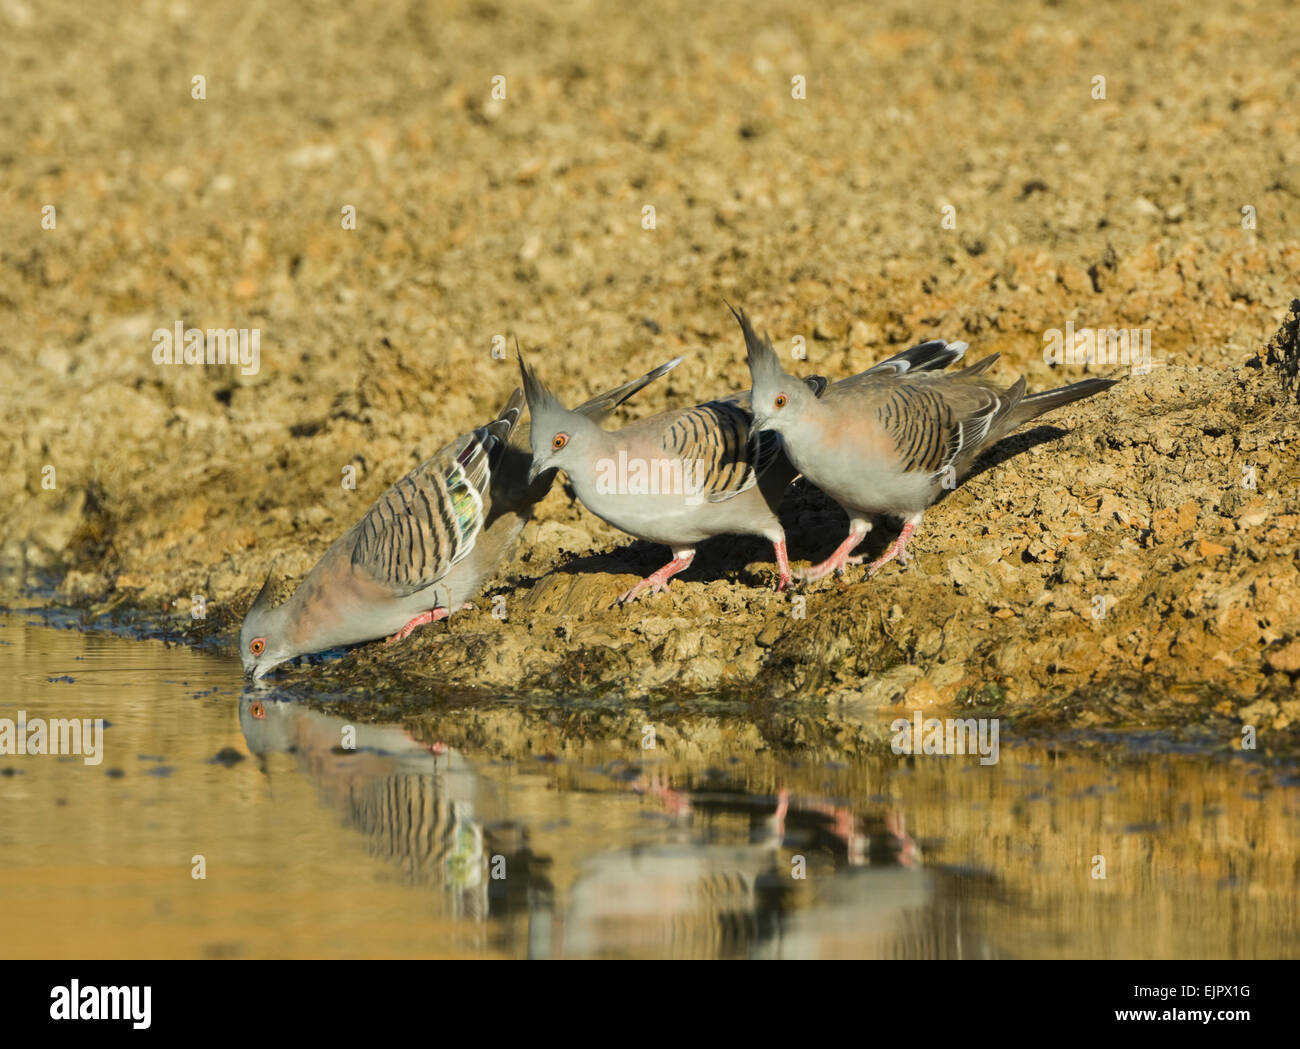 Crested Pigeons (Ocyphaps lophotes) drinking from a pool at daybreak - Mungo National Park, New South Wales, Australia Stock Photo